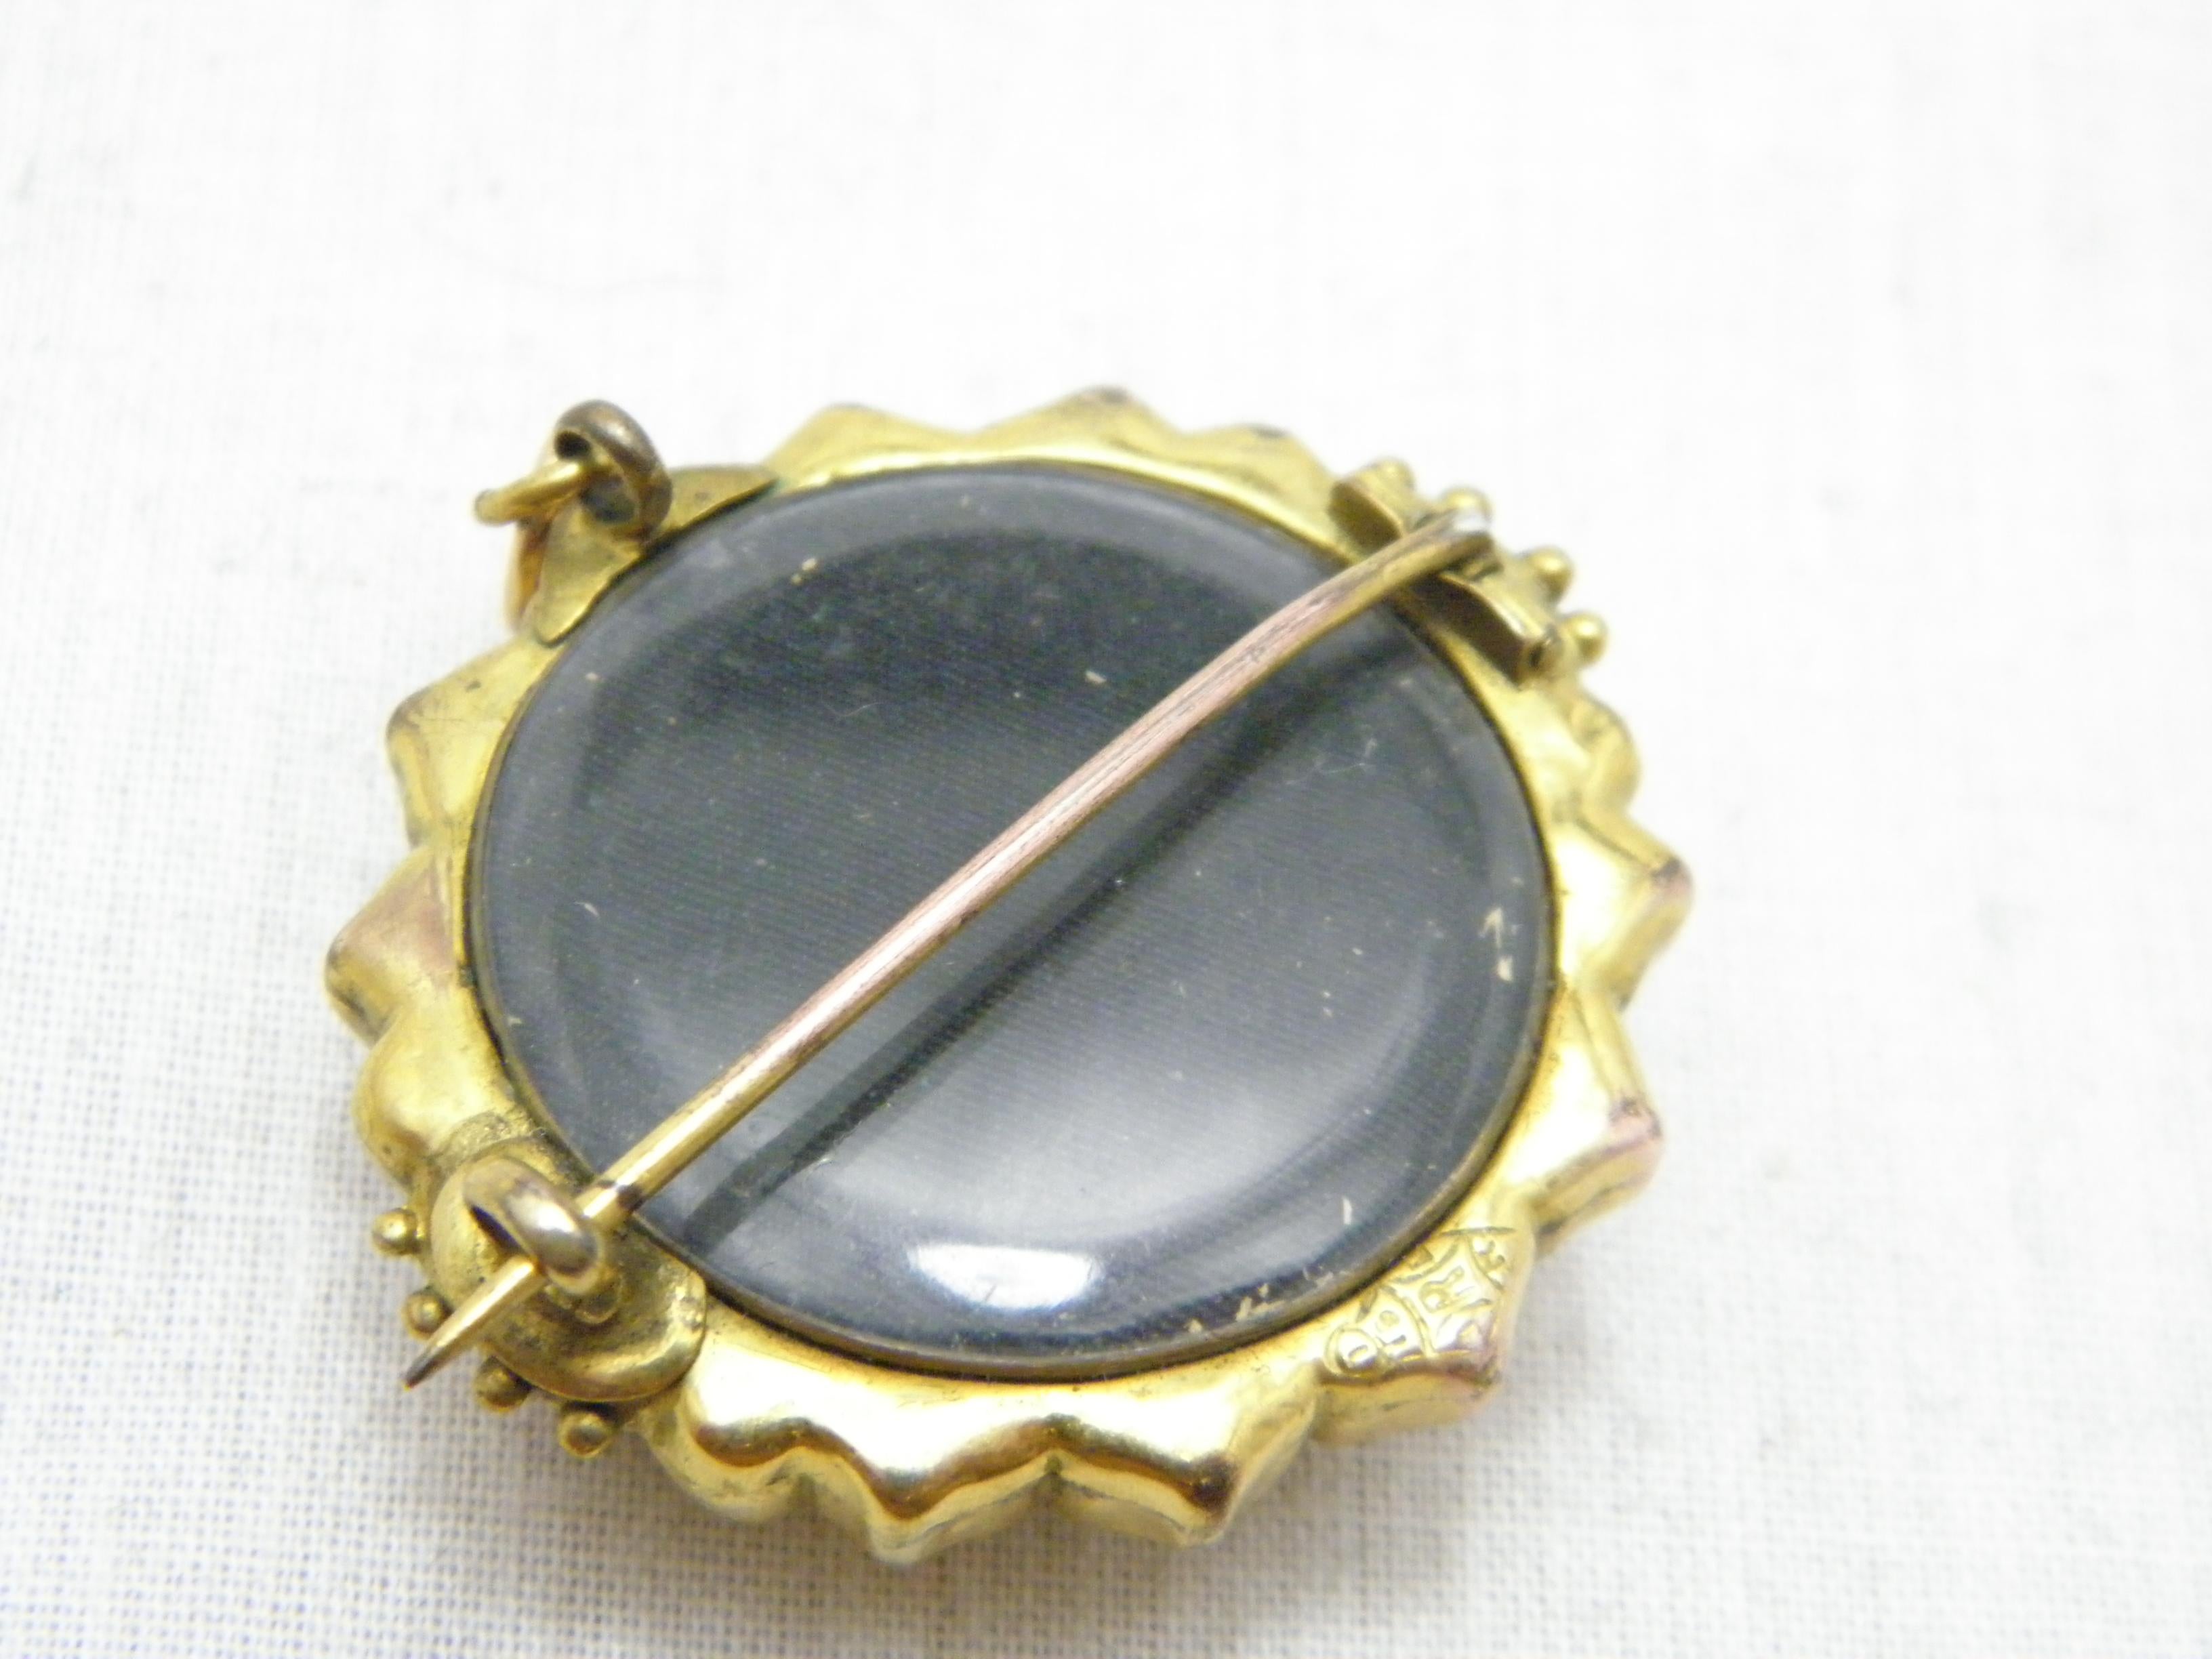 Antique 15ct Gold Locket Photo Target Brooch Pin c1810 Heavy 10g 625 Purity For Sale 2